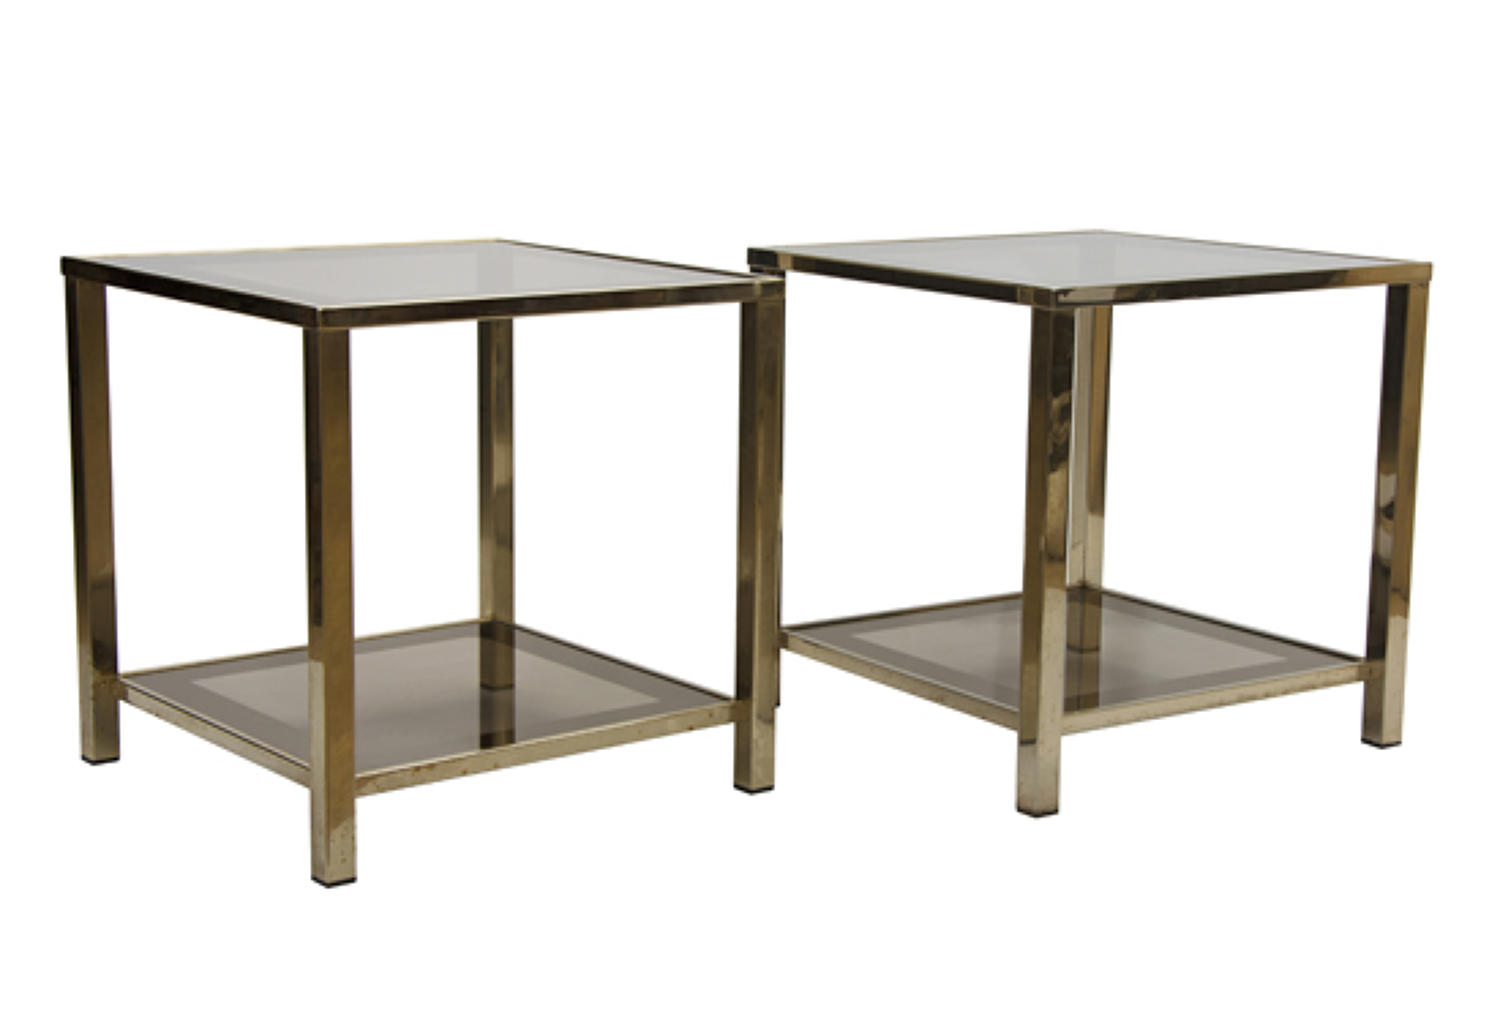 Pair of Gold Plated Side Tables by Belgo Chrom c.1975